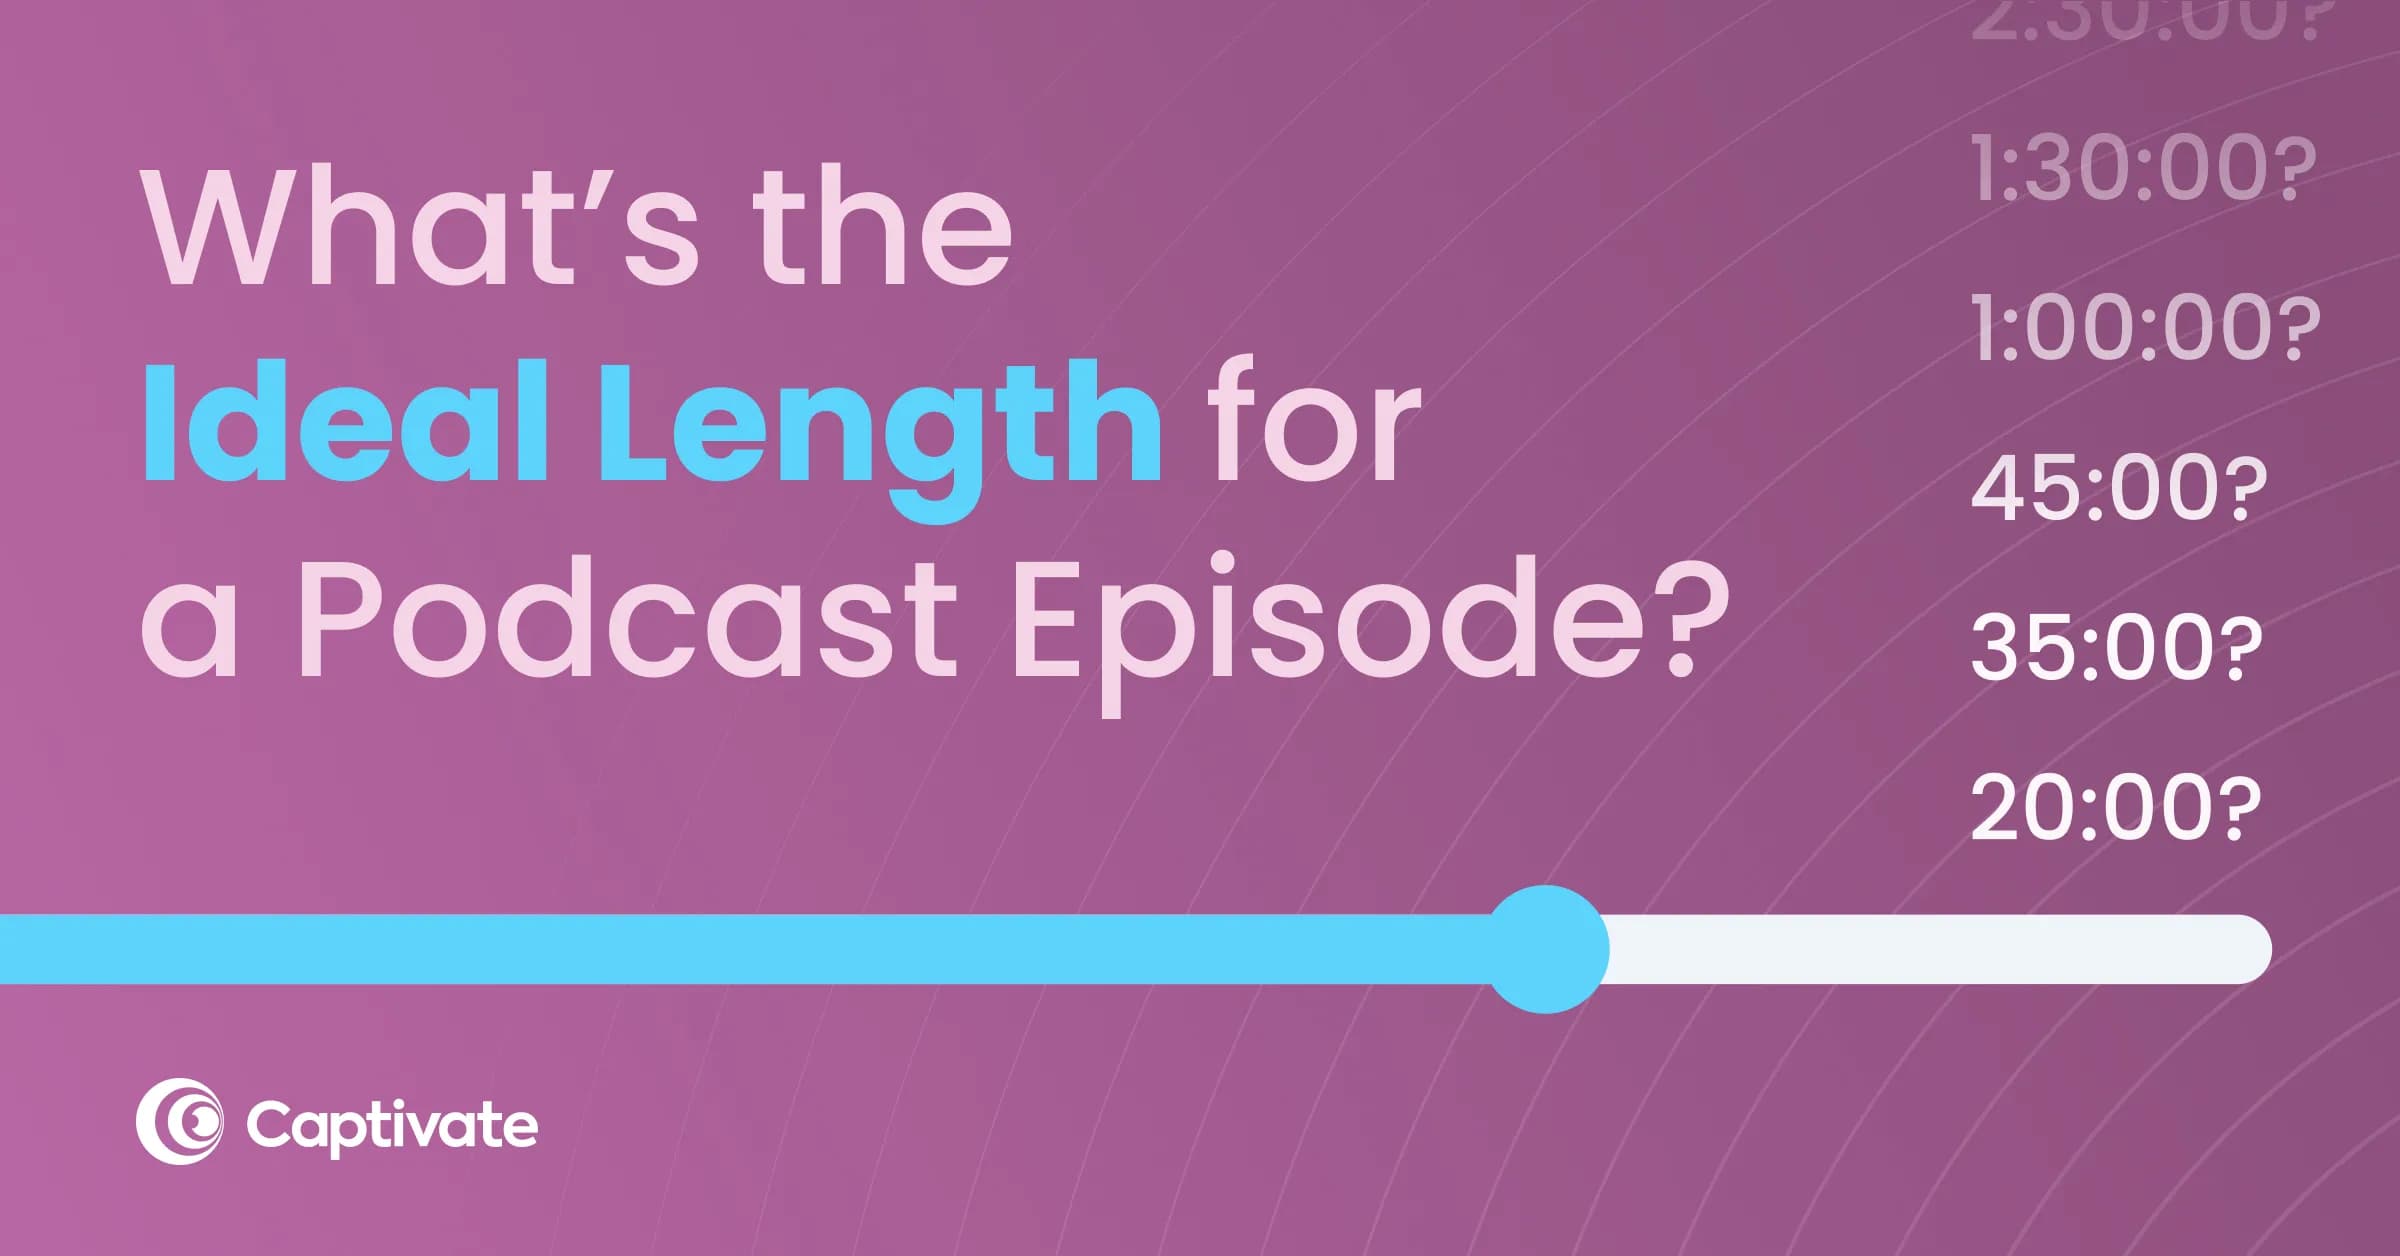 Find Your Ideal Podcast Episode Length!